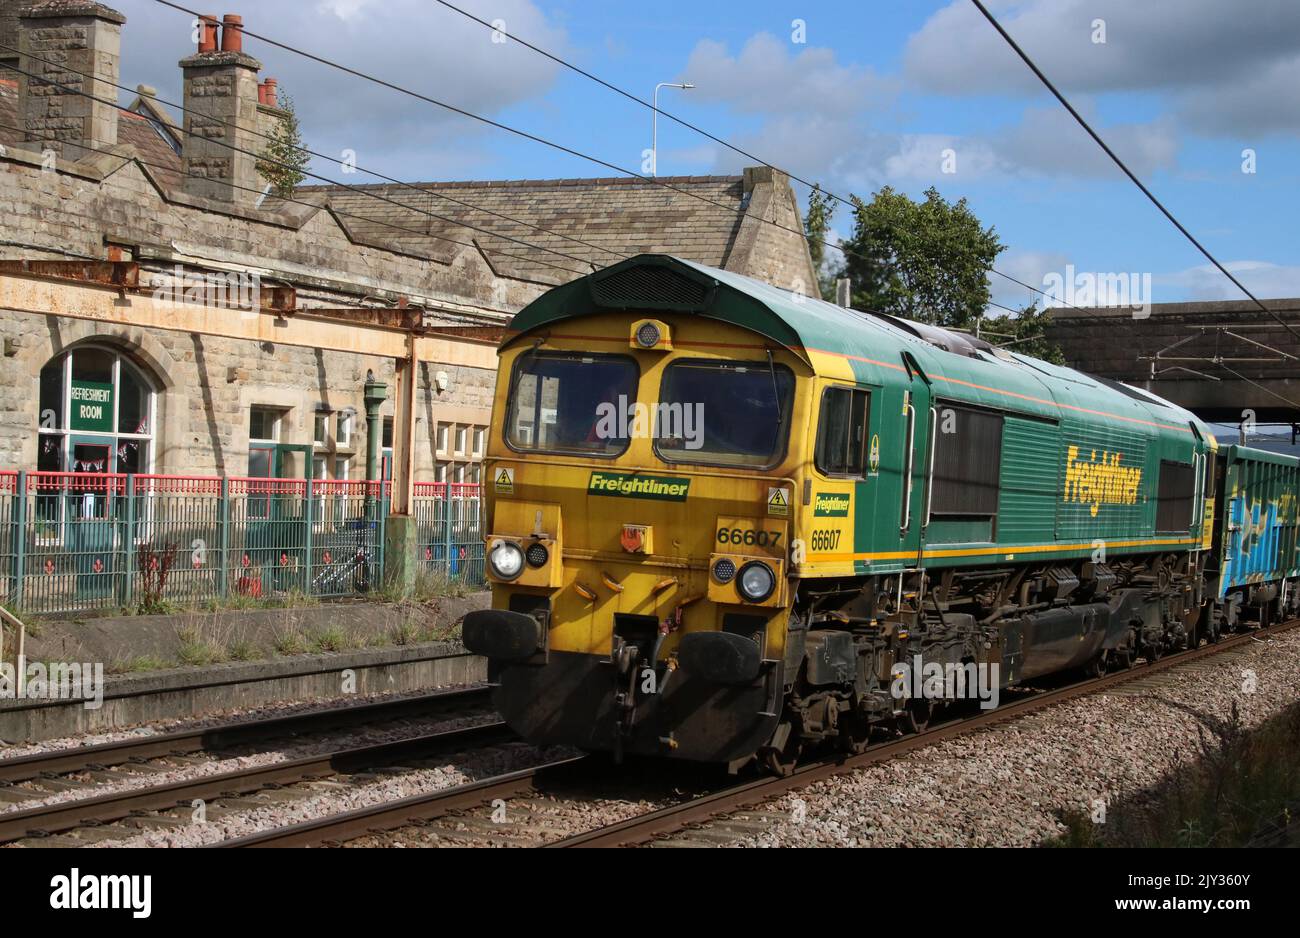 Freightliner heavy haul class 66 shed, number 66607, hauling a freight train along the West Coast Main Line through Carnforth on 7th September 2022. Stock Photo